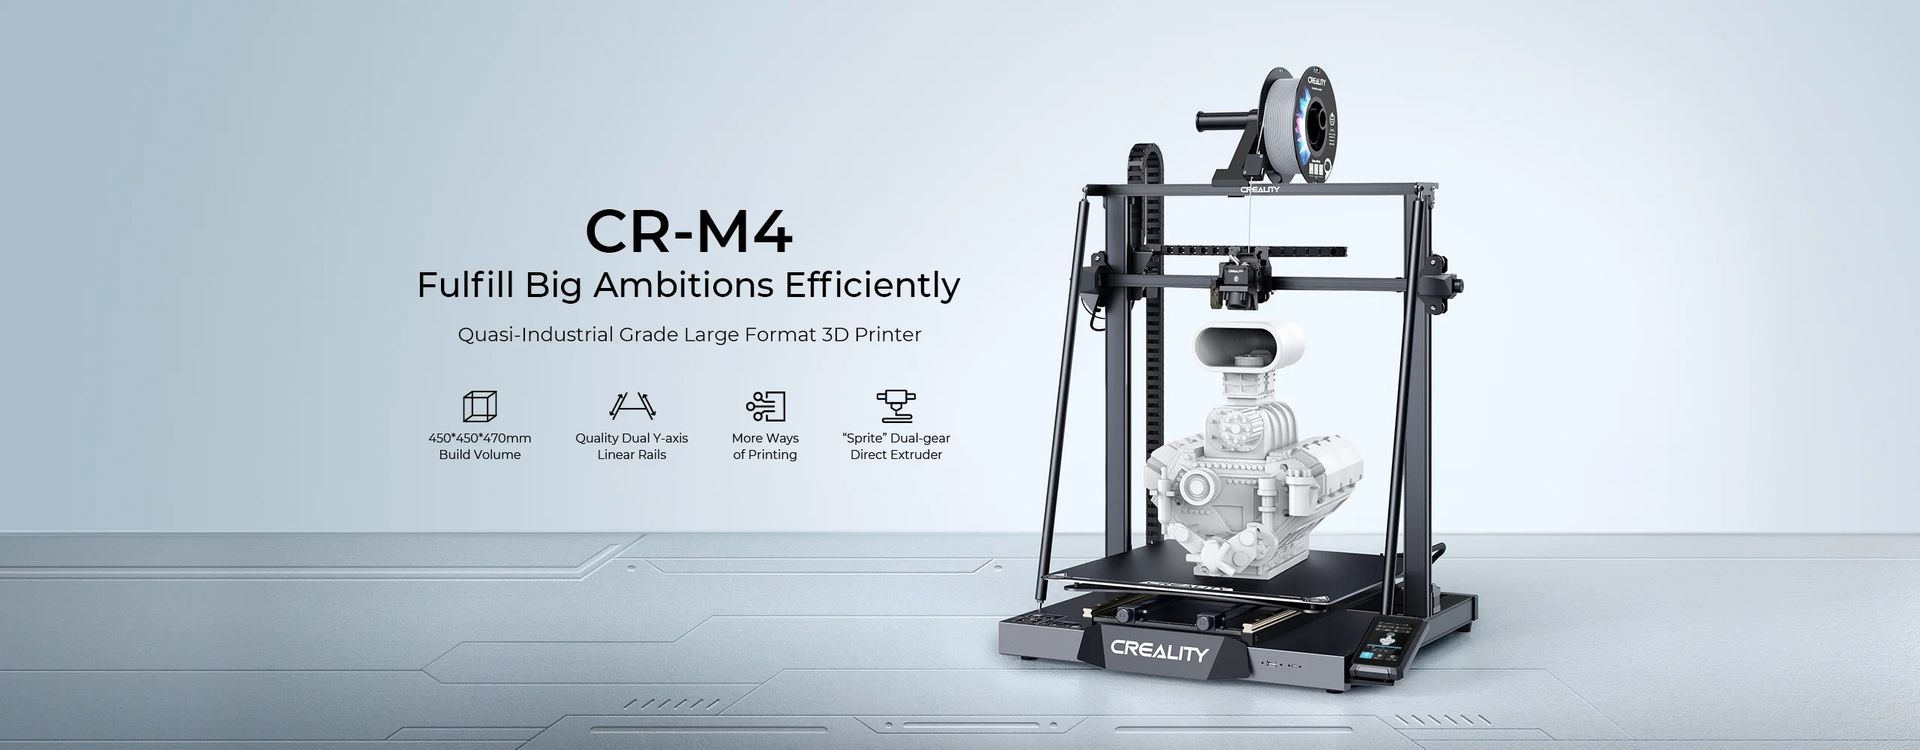 Creality3D-CR-M4-Printer-Overview